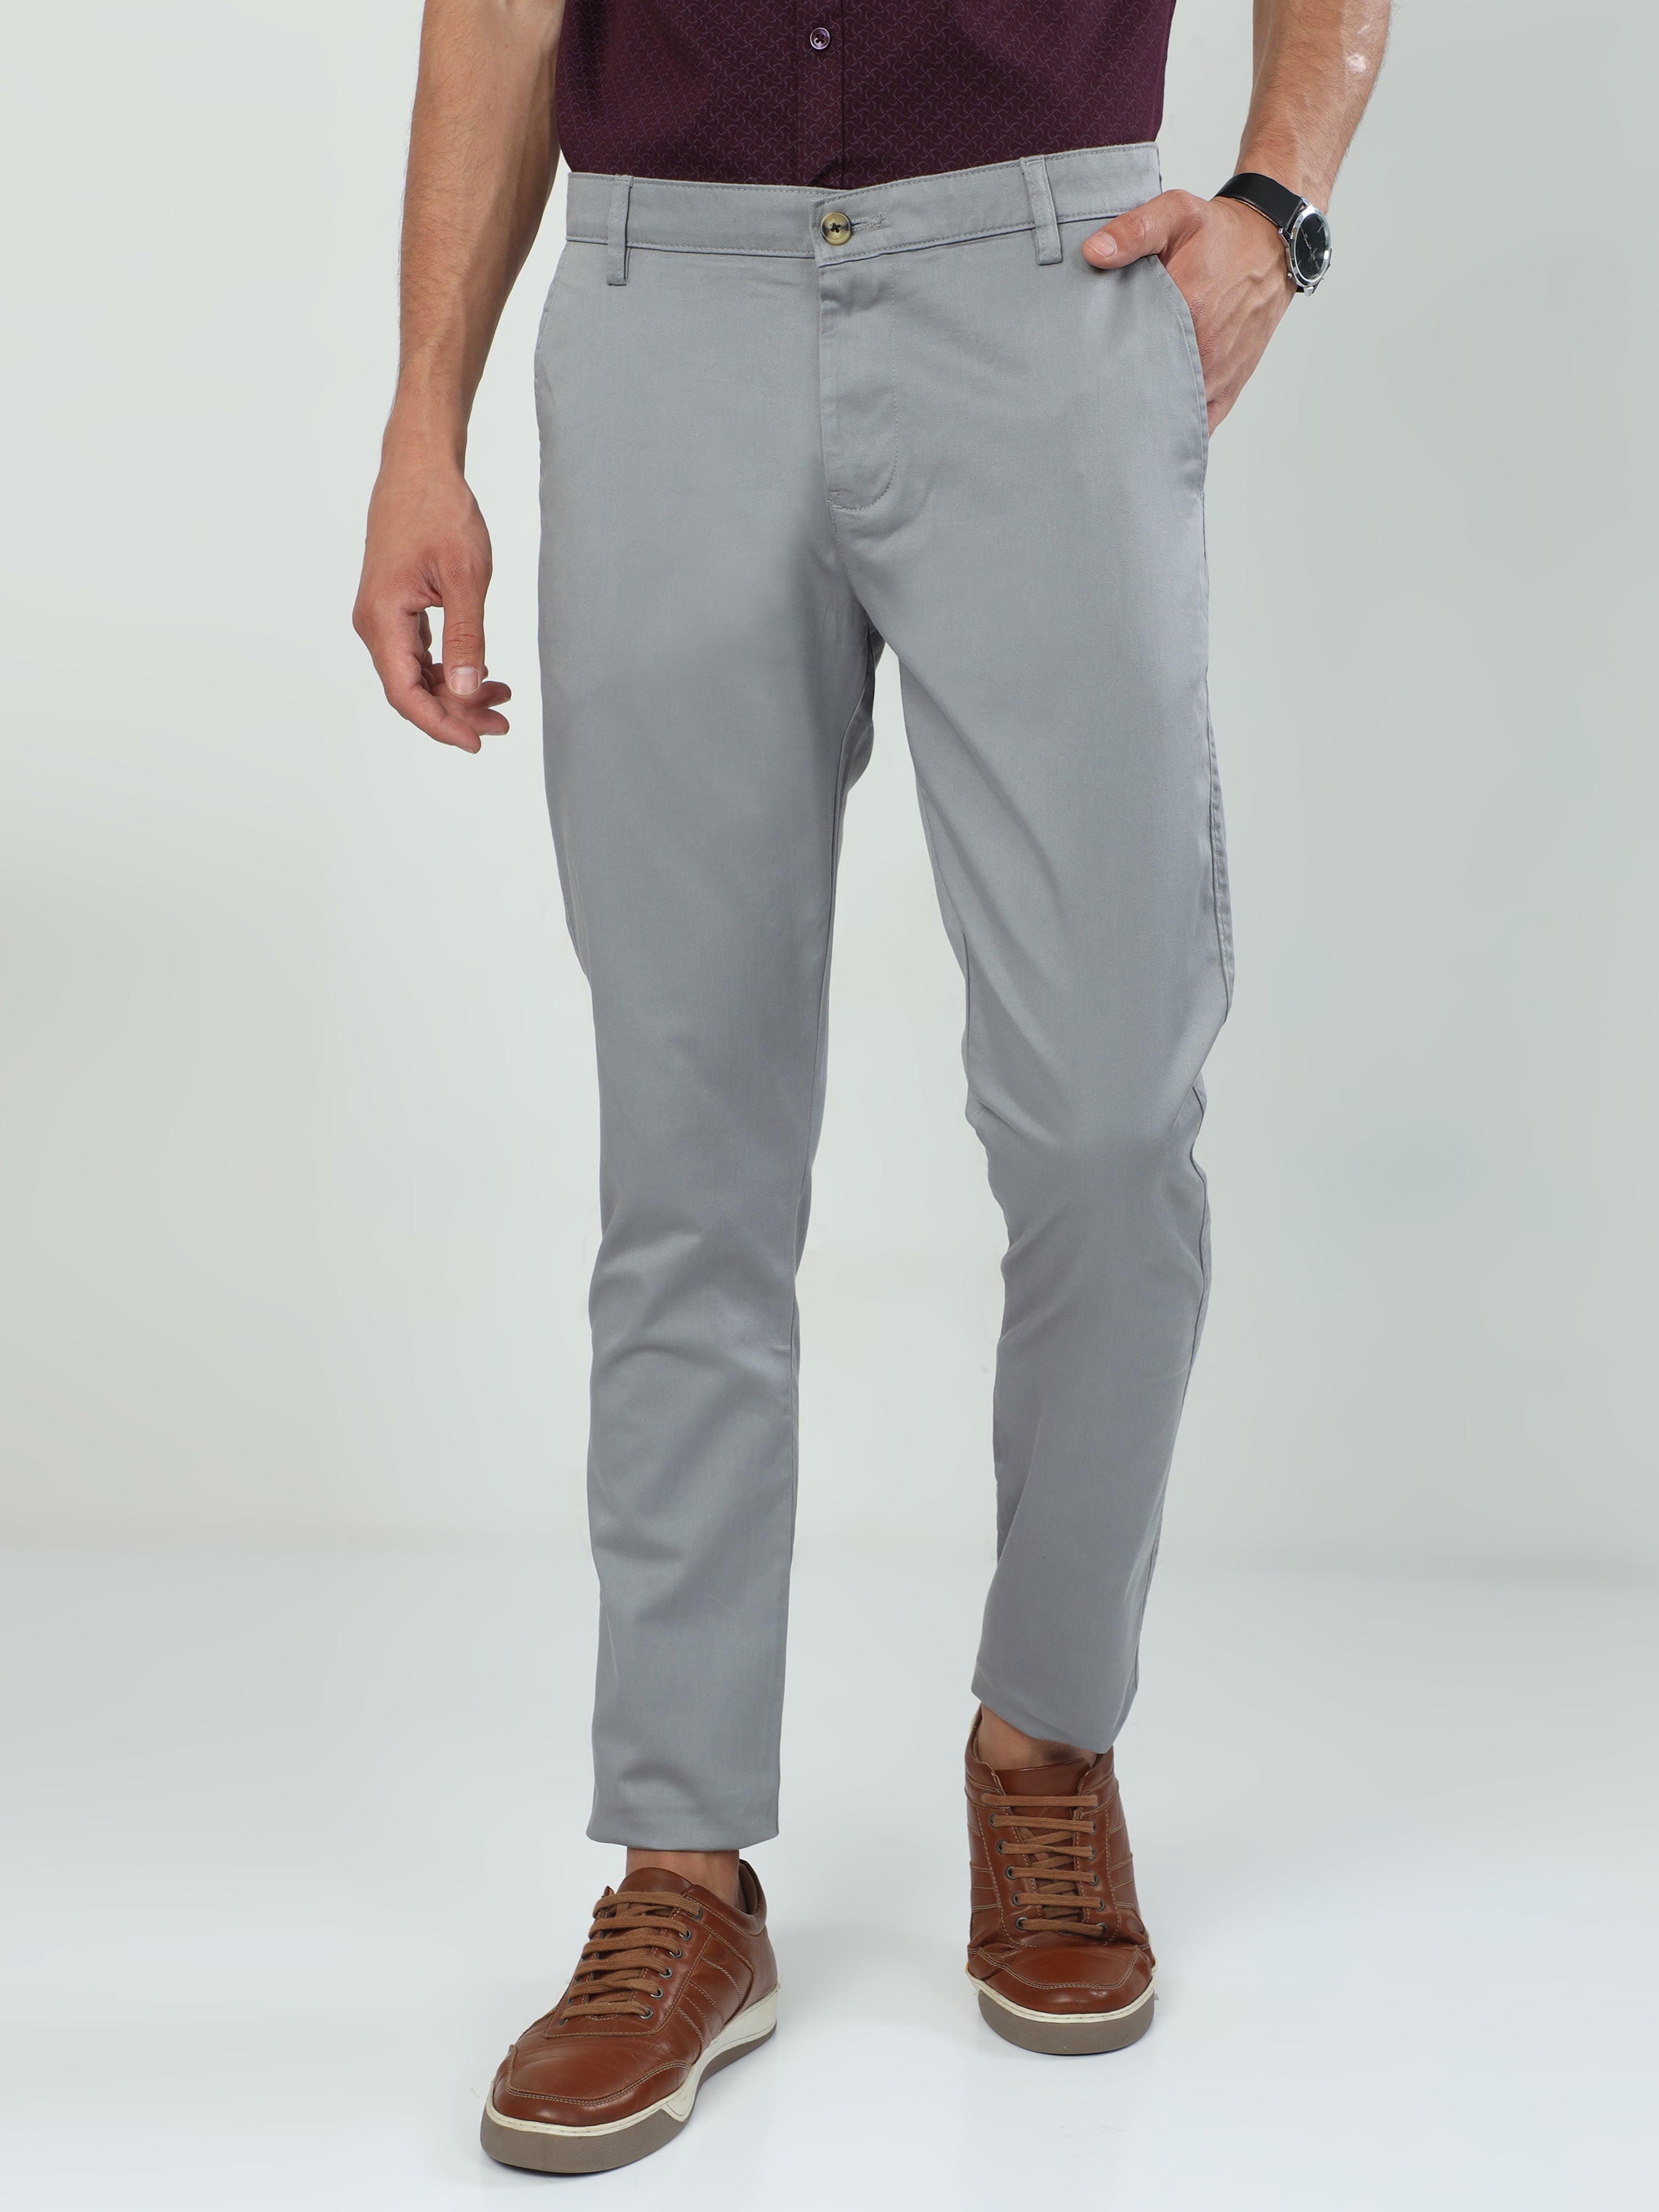 Mens Party Wear Cotton Trouser at Rs 535 | Men Cotton Trousers in Jaipur |  ID: 23098427133